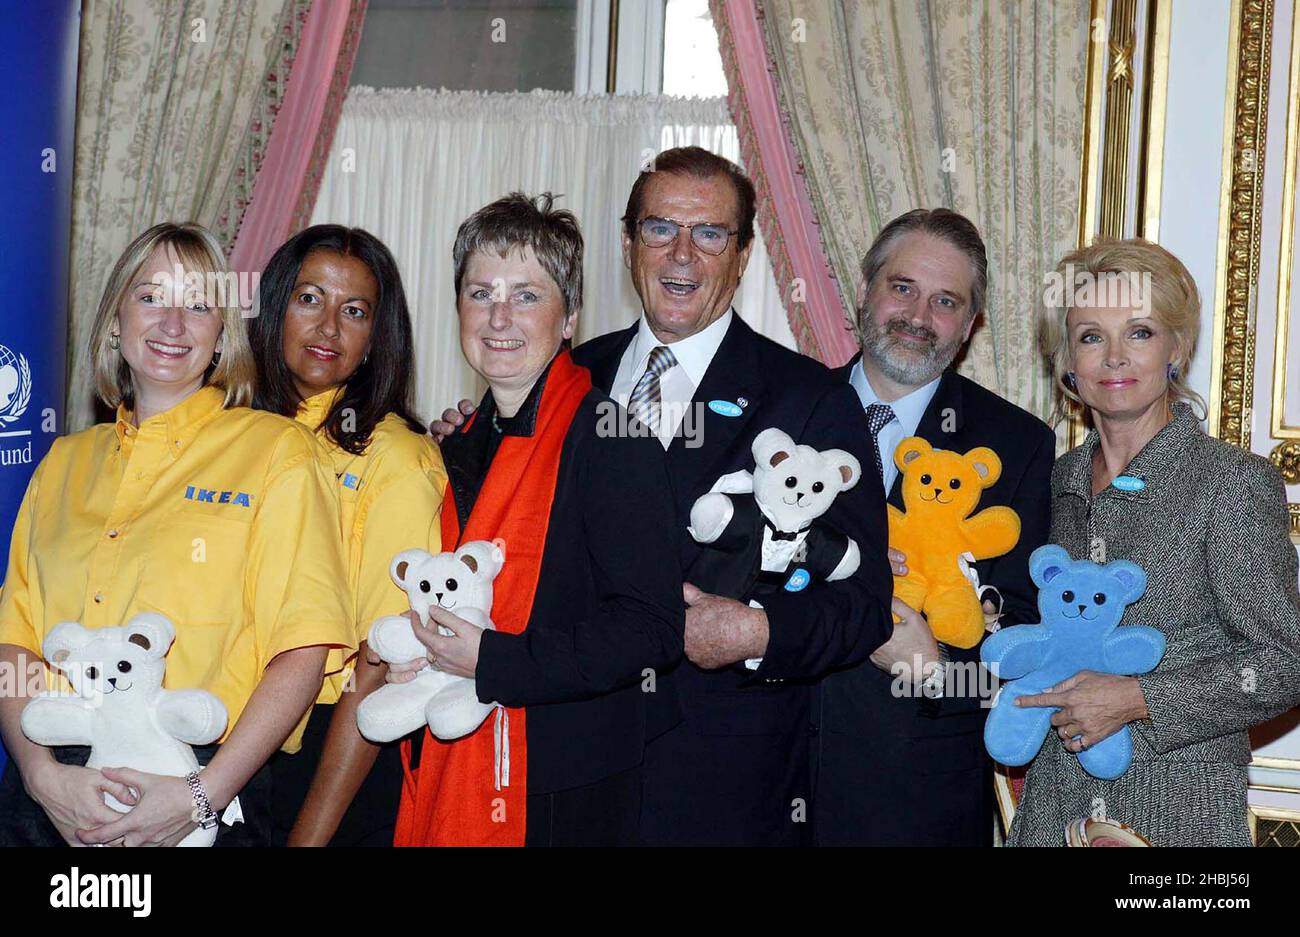 Sir Roger Moore with teddy bears and his wife Lady Christina and members of Unicef & Ikea supports UNICEF & Ikea at the Ritz West London. Stock Photo